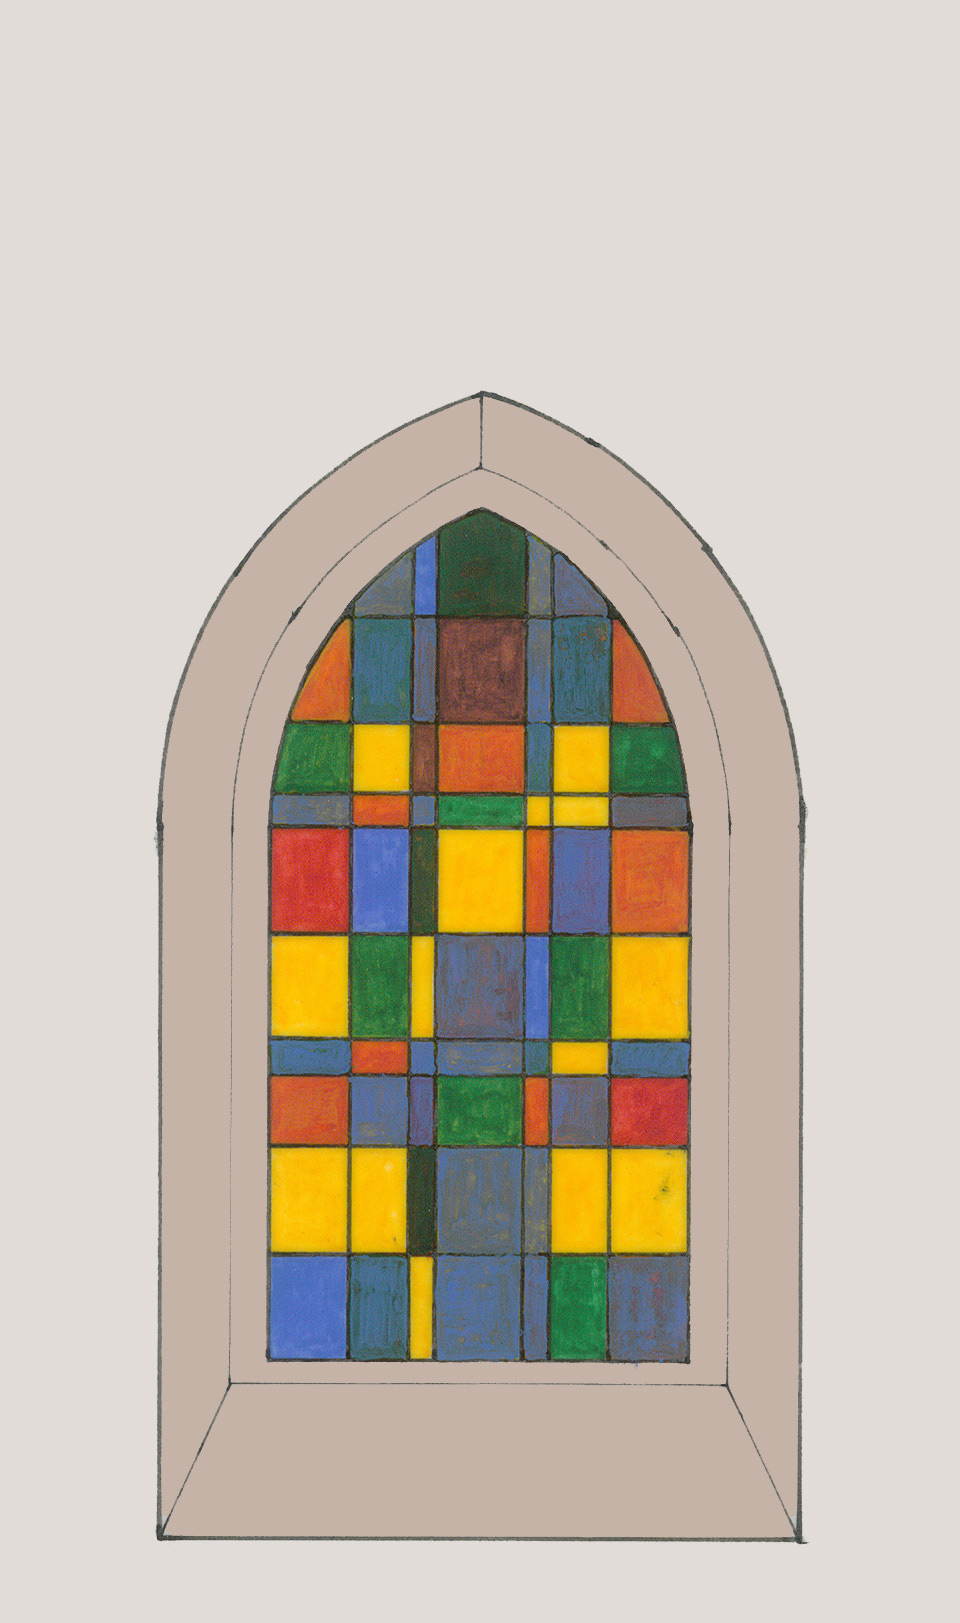 Stained glass and colored light projects as architectural elementss